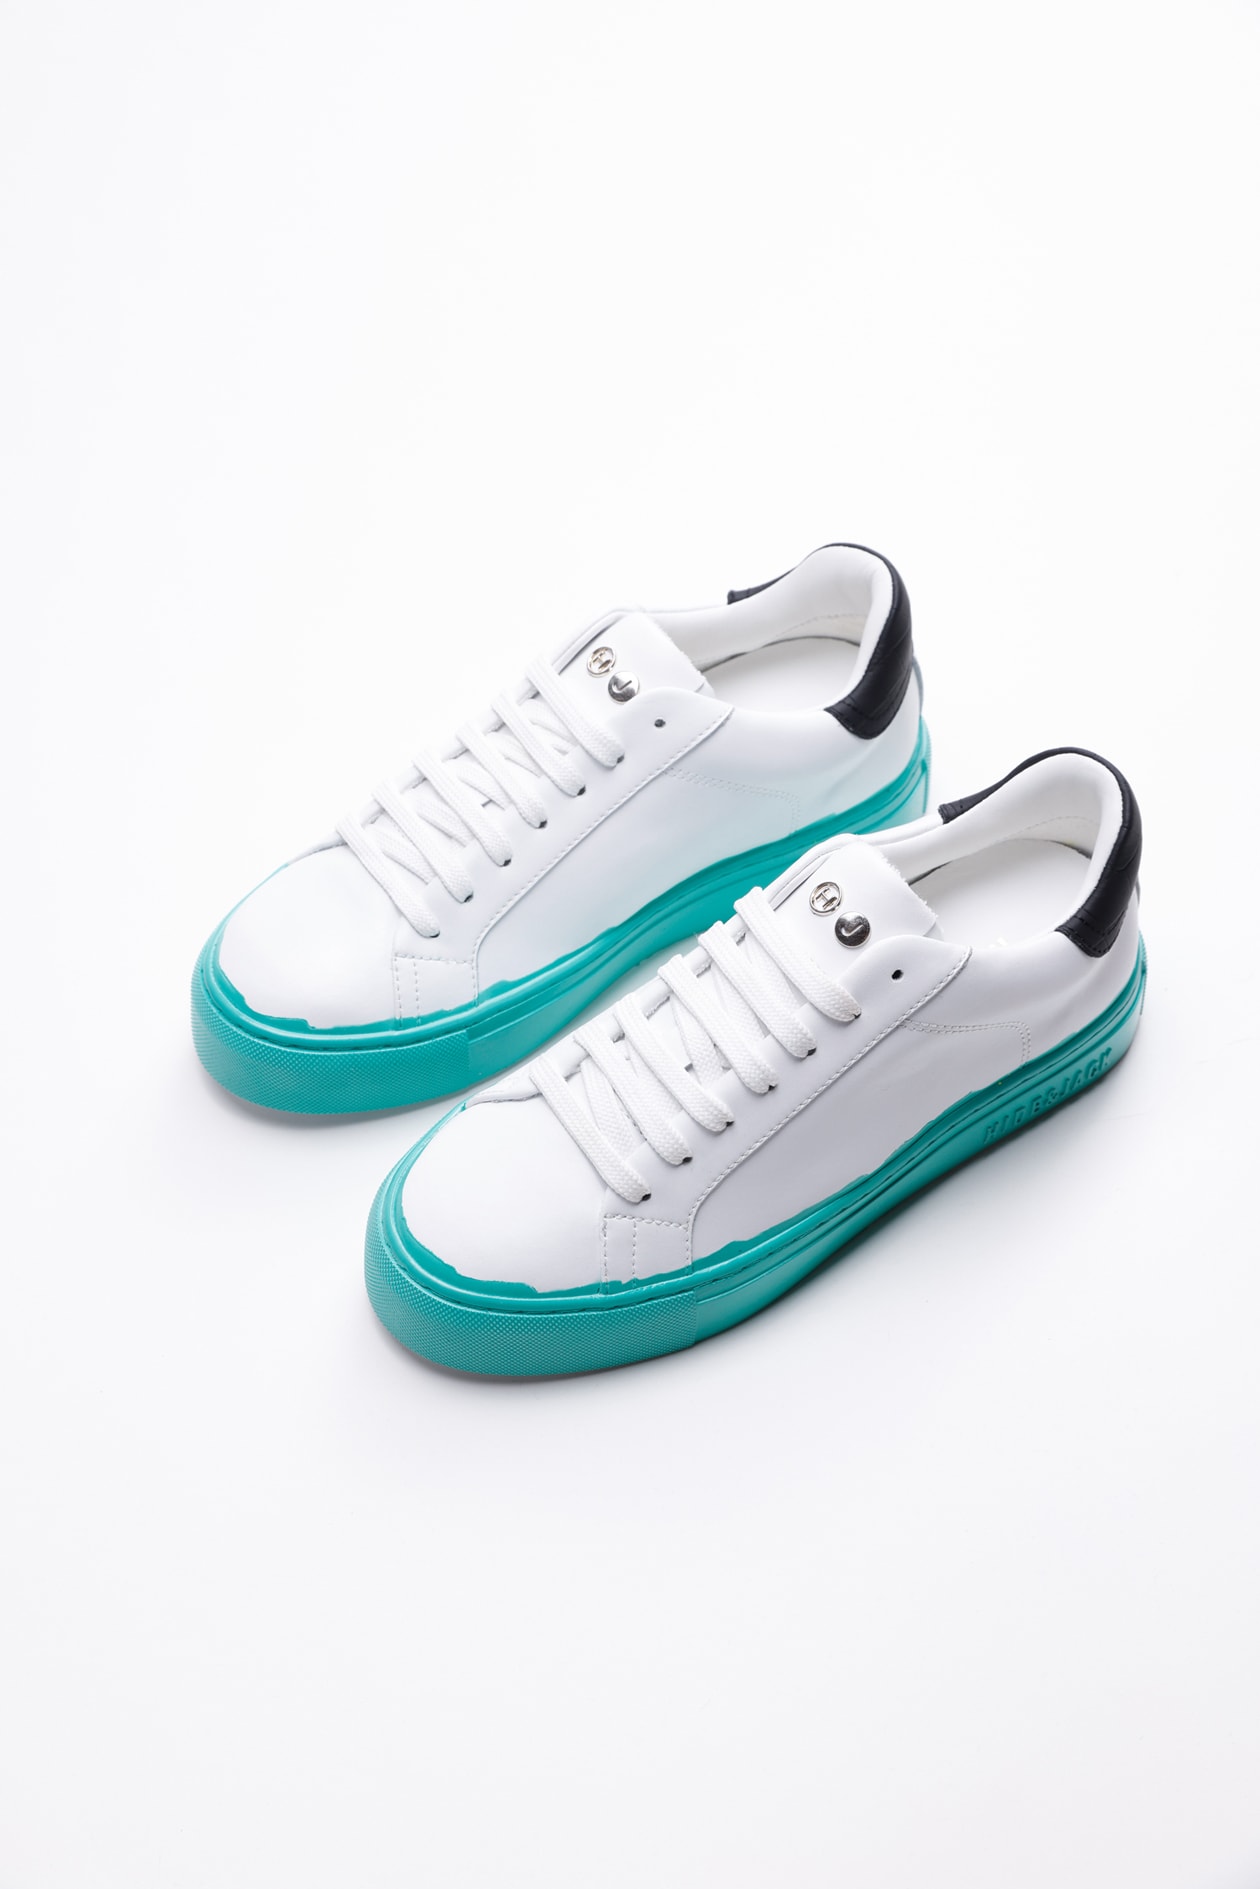 Hide&amp;jack Low Top Sneaker - Sky Candy Tiffany In White